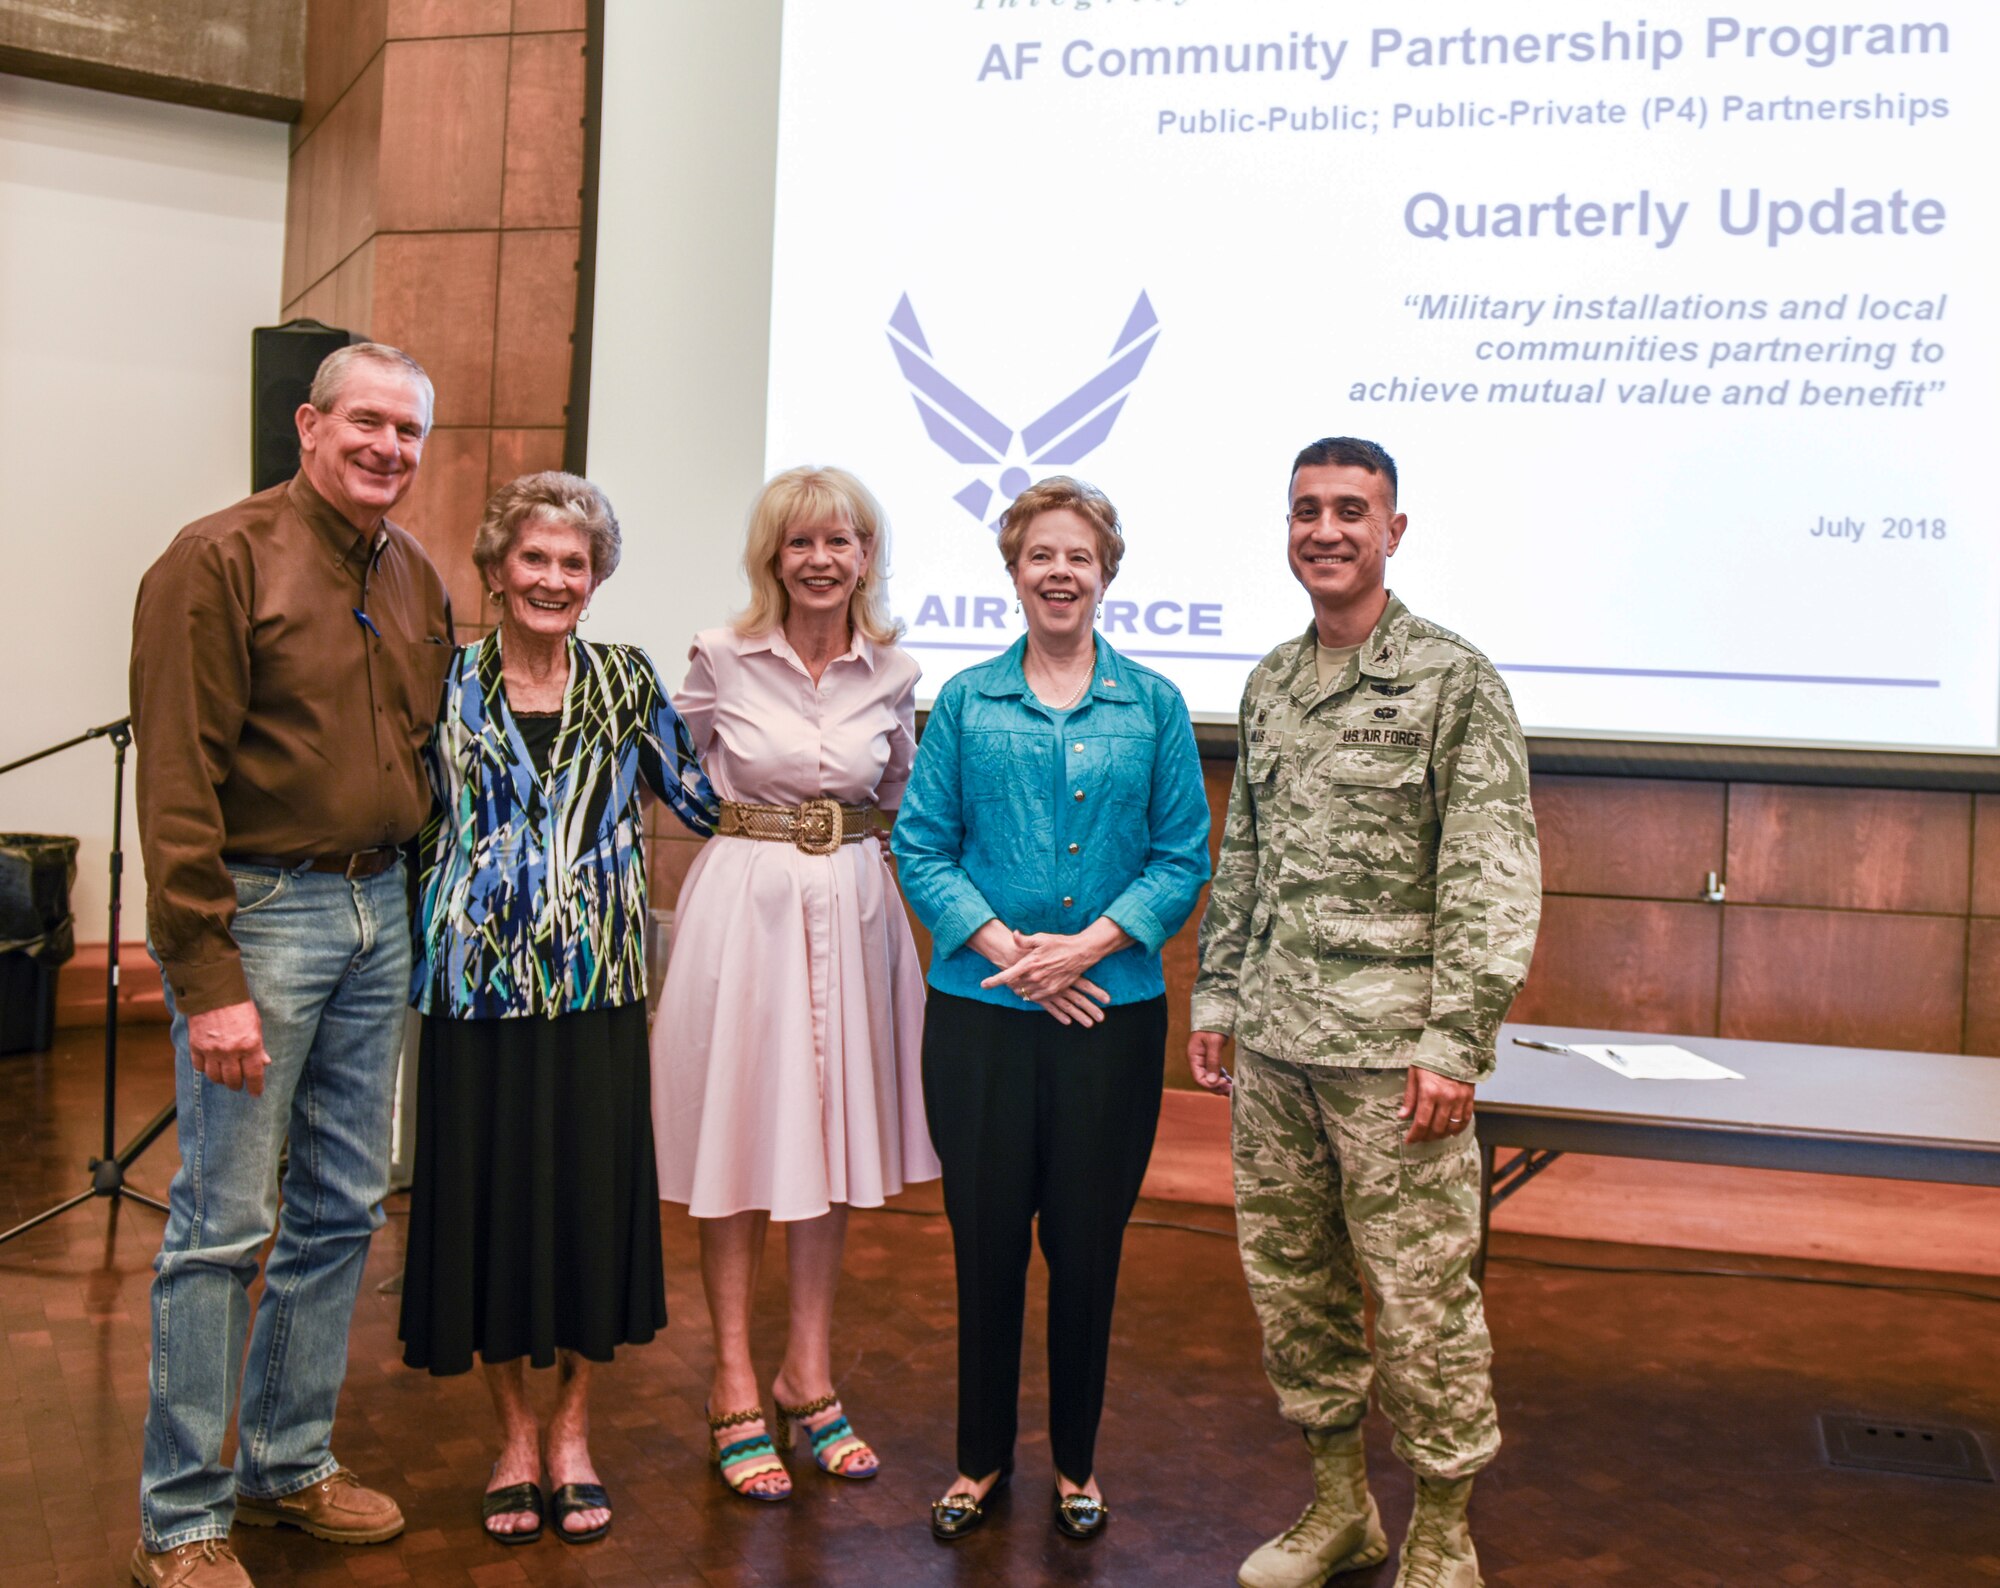 San Angelo Judge Stephen Floyd, the Regional Director for Rep. Mike Conoway, JoAnn Powell, San Angelo Mayor Brenda Gunter, civic leader Dr. Carol Ann Bonds and U.S. Air Force Col. Ricky Mills, 17th Training Wing commander, pose after signing the Goodfellow-San Angelo Partnership Charter during the quarterly partnership meeting held at the San Angelo Museum of Fine Arts, San Angelo, Texas, July 19, 2018. Chamber president Bruce Partain also signed the agreement but was unable to attend the meeting. (U.S. Air Force photo by Aryn Lockhart/Released)